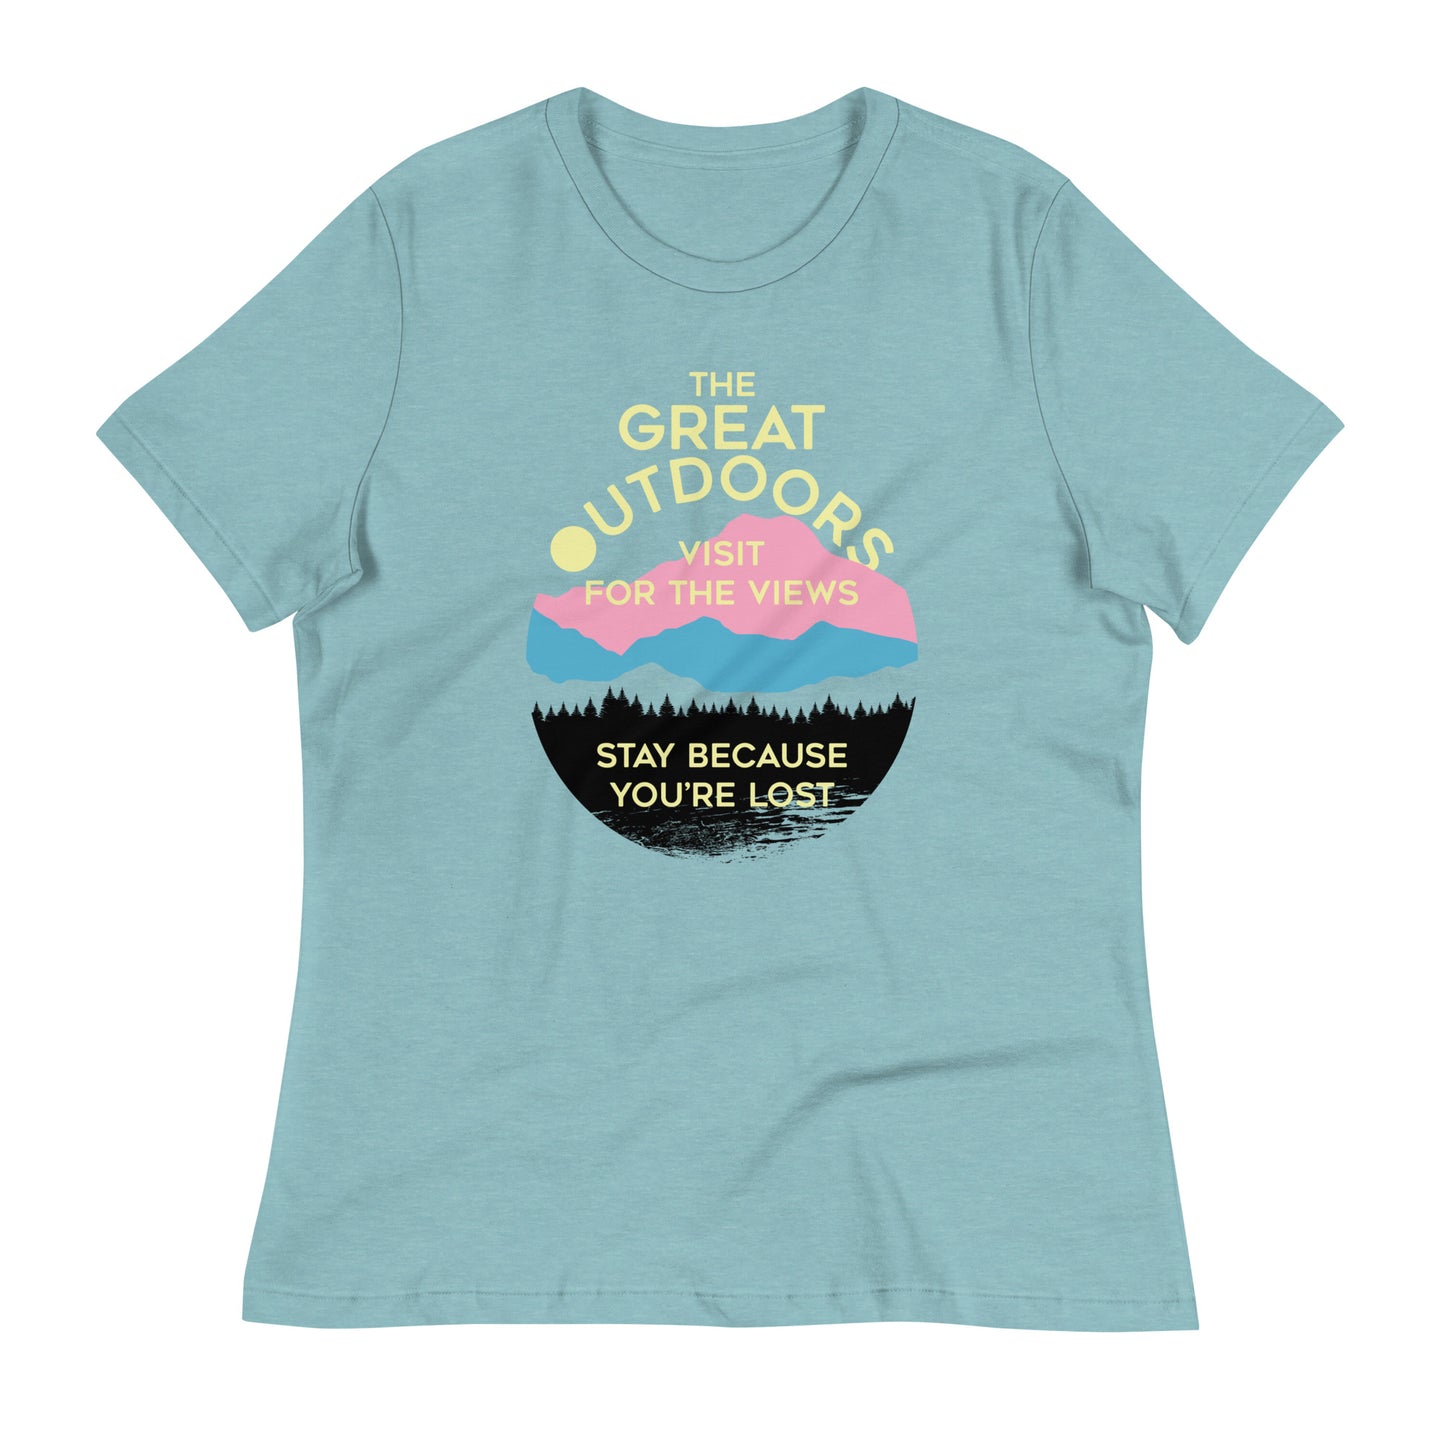 The Great Outdoors Women's Signature Tee